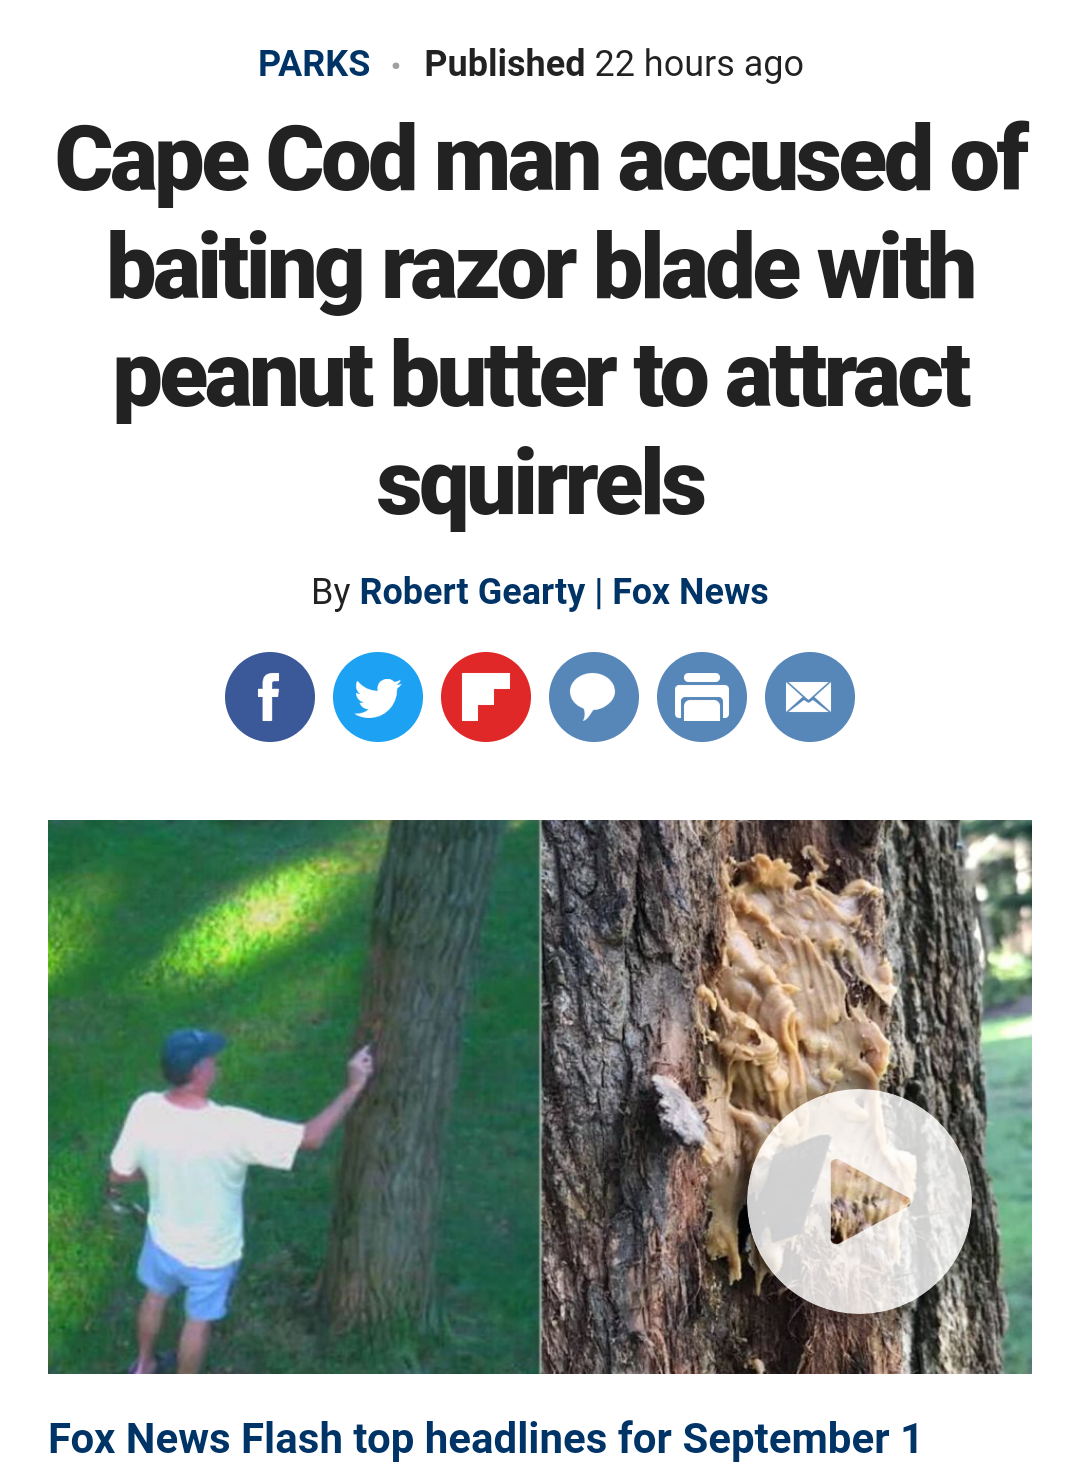 quotes - Parks . Published 22 hours ago Cape Cod man accused of baiting razor blade with peanut butter to attract squirrels By Robert Gearty Fox News Oooooo Fox News Flash top headlines for September 1